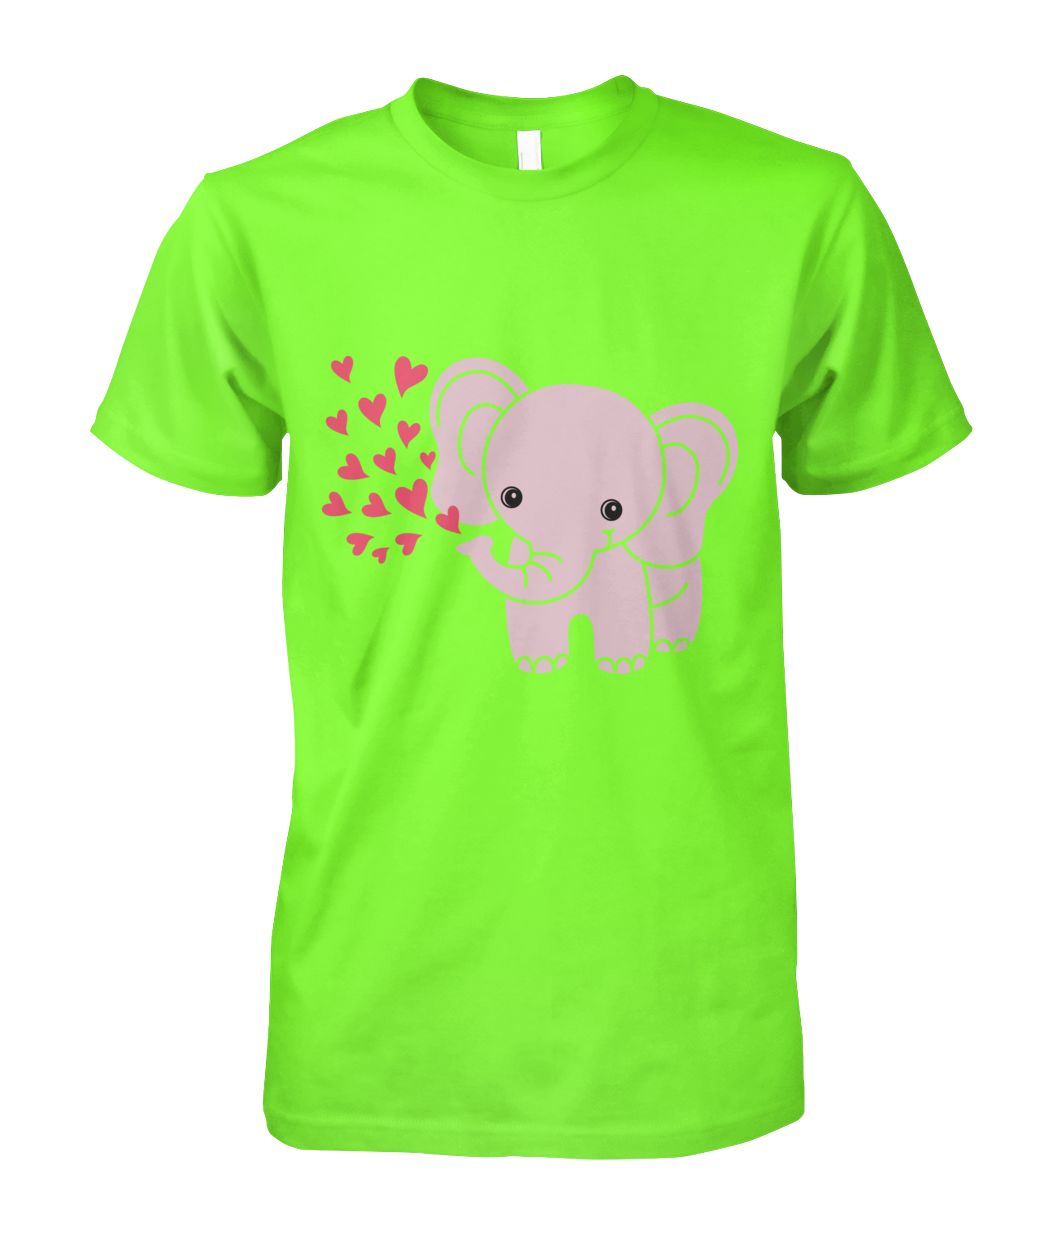 Baby Elephant Shirt with Red Hearts - Rescue The Elephants